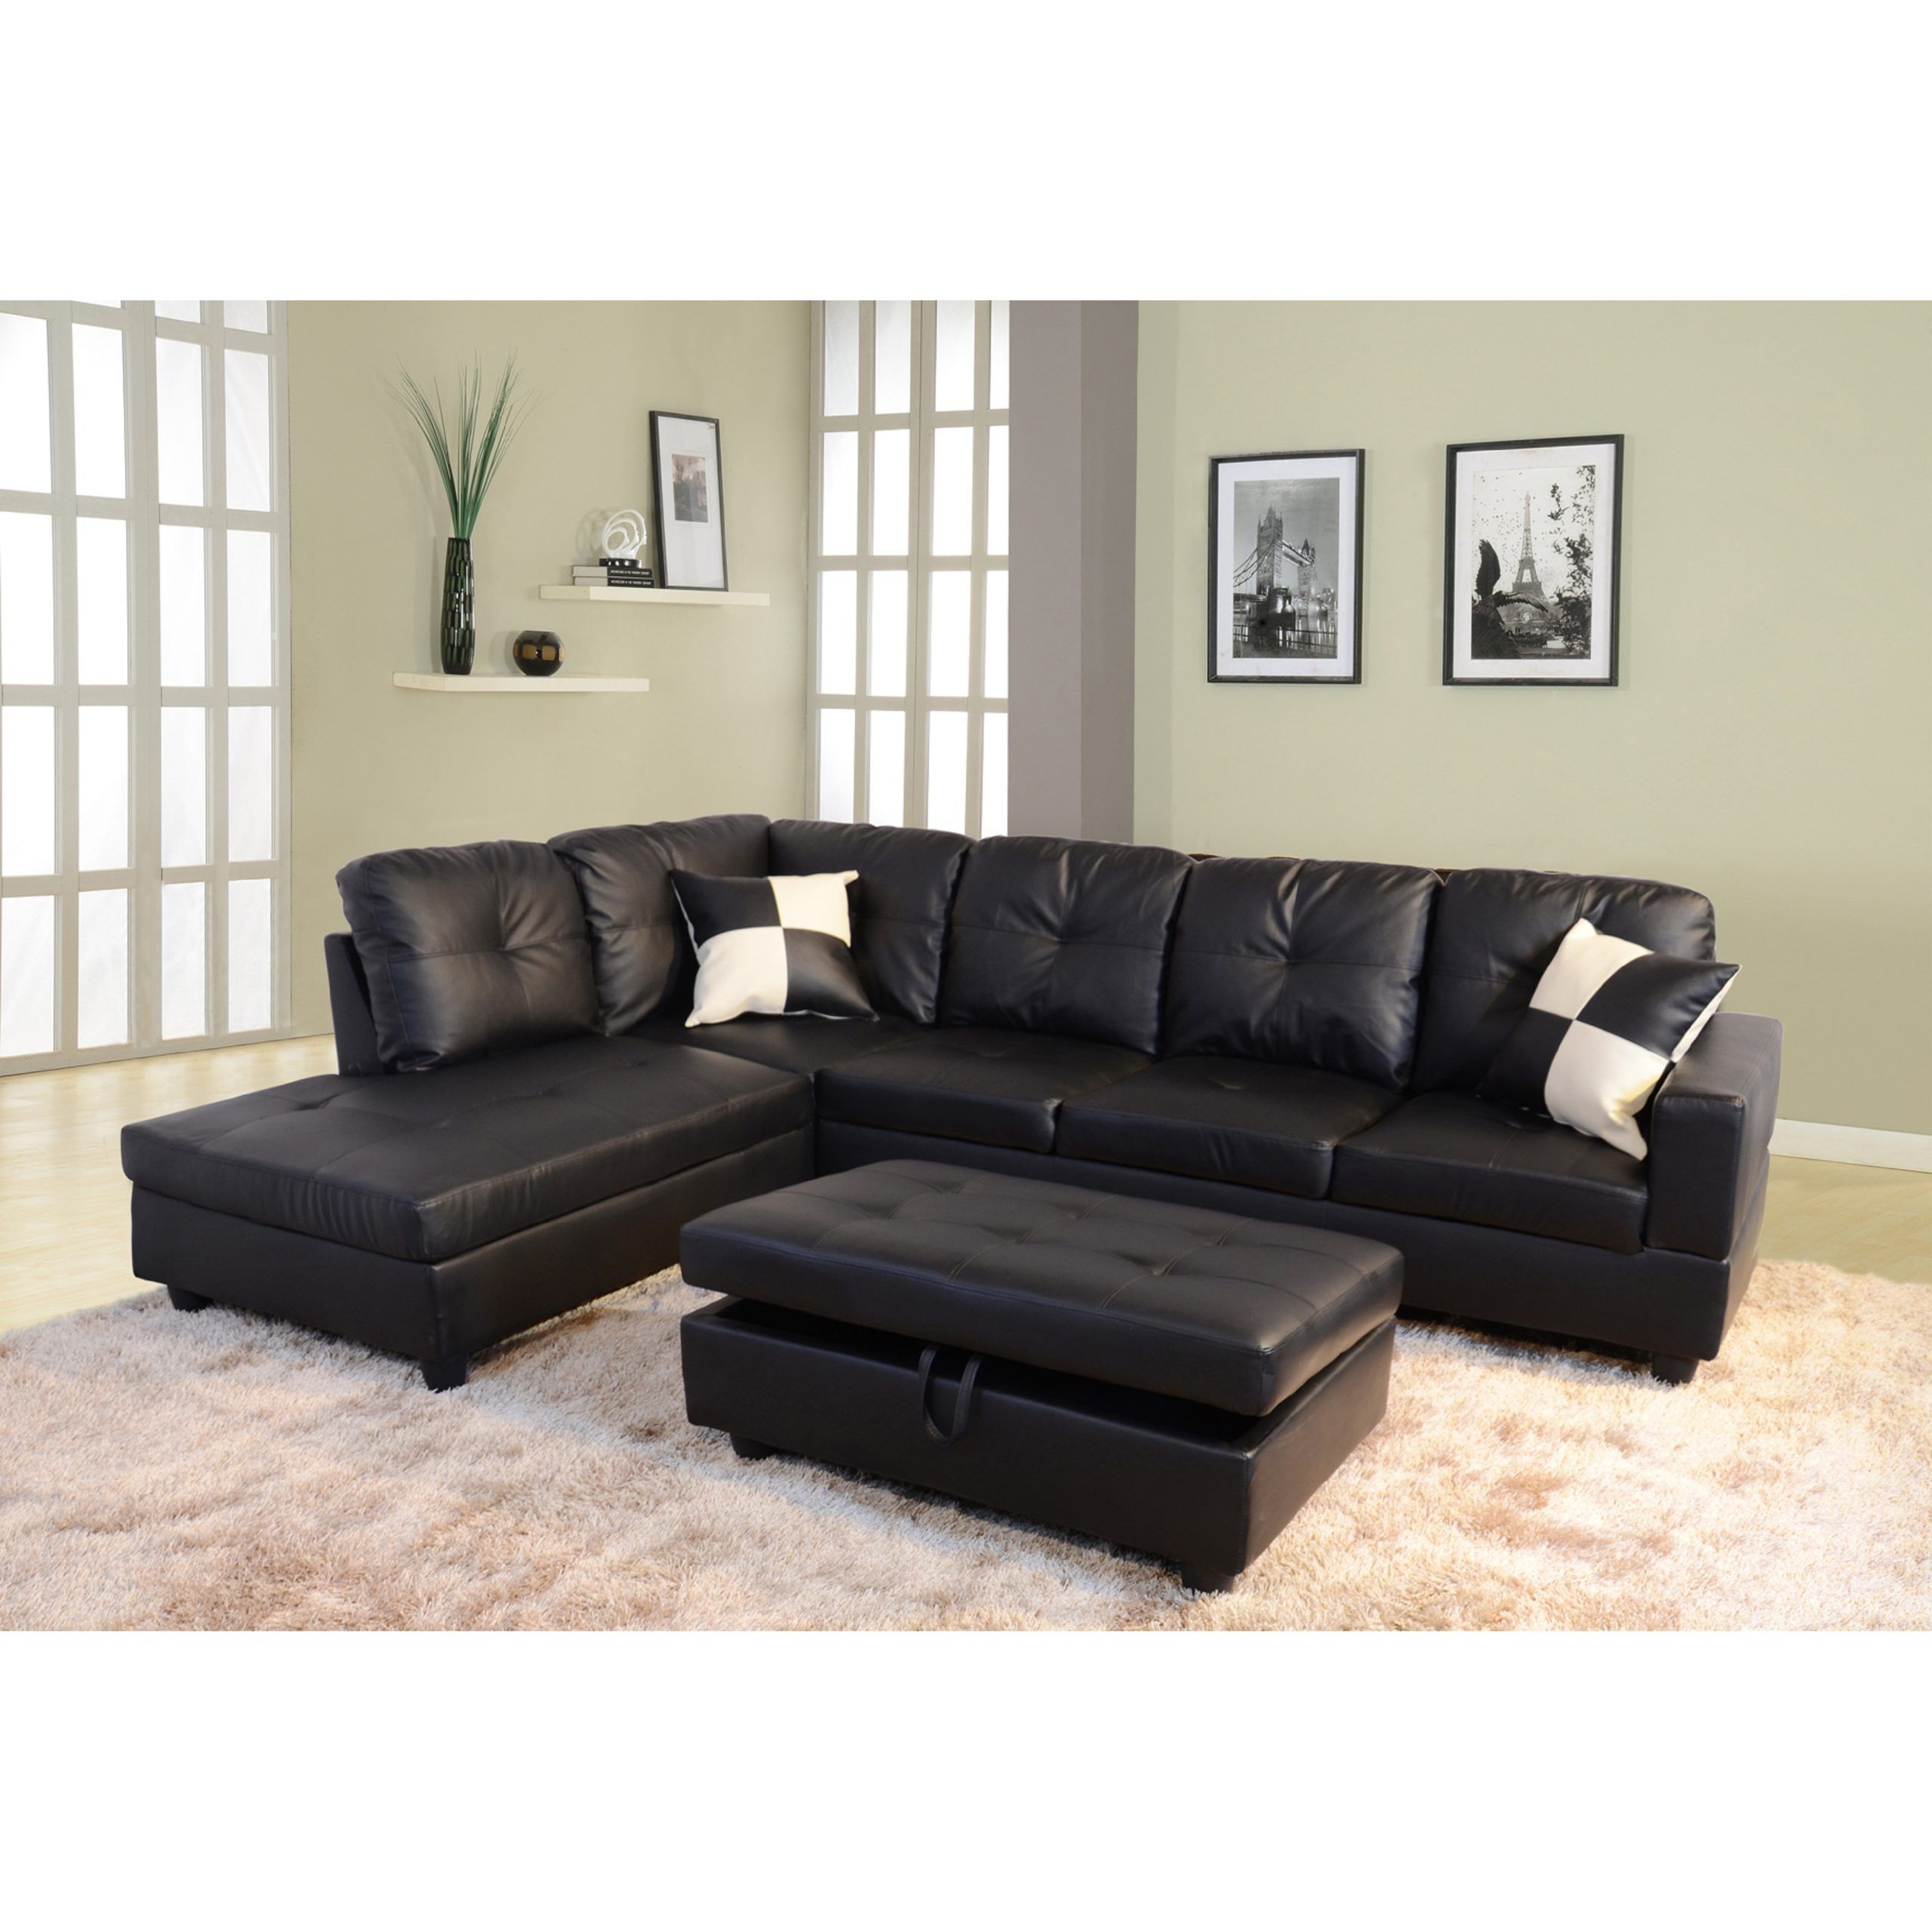 3 Pieces Sectional Sofa Set,left Facing Black(091a) – On Sale – Bed Bath &  Beyond – 33560697 Inside 3 Piece Leather Sectional Sofa Sets (Photo 11 of 15)